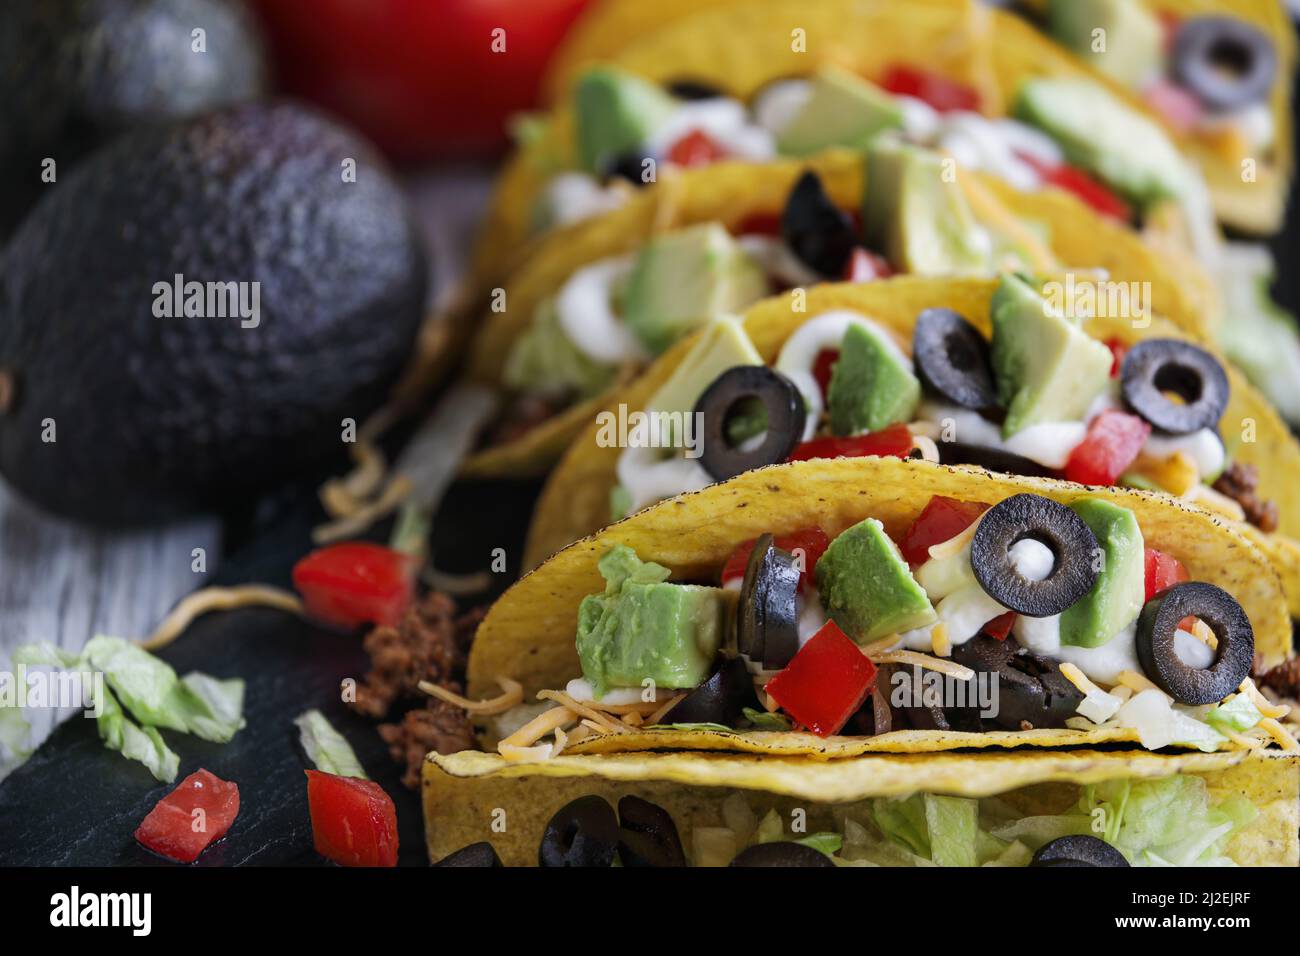 Tacos made of corn tortillas, ground beef, shredded cheddar cheese, black olives, avocados, lettuce, sour cream and tomatoes. Selective focus with blu Stock Photo